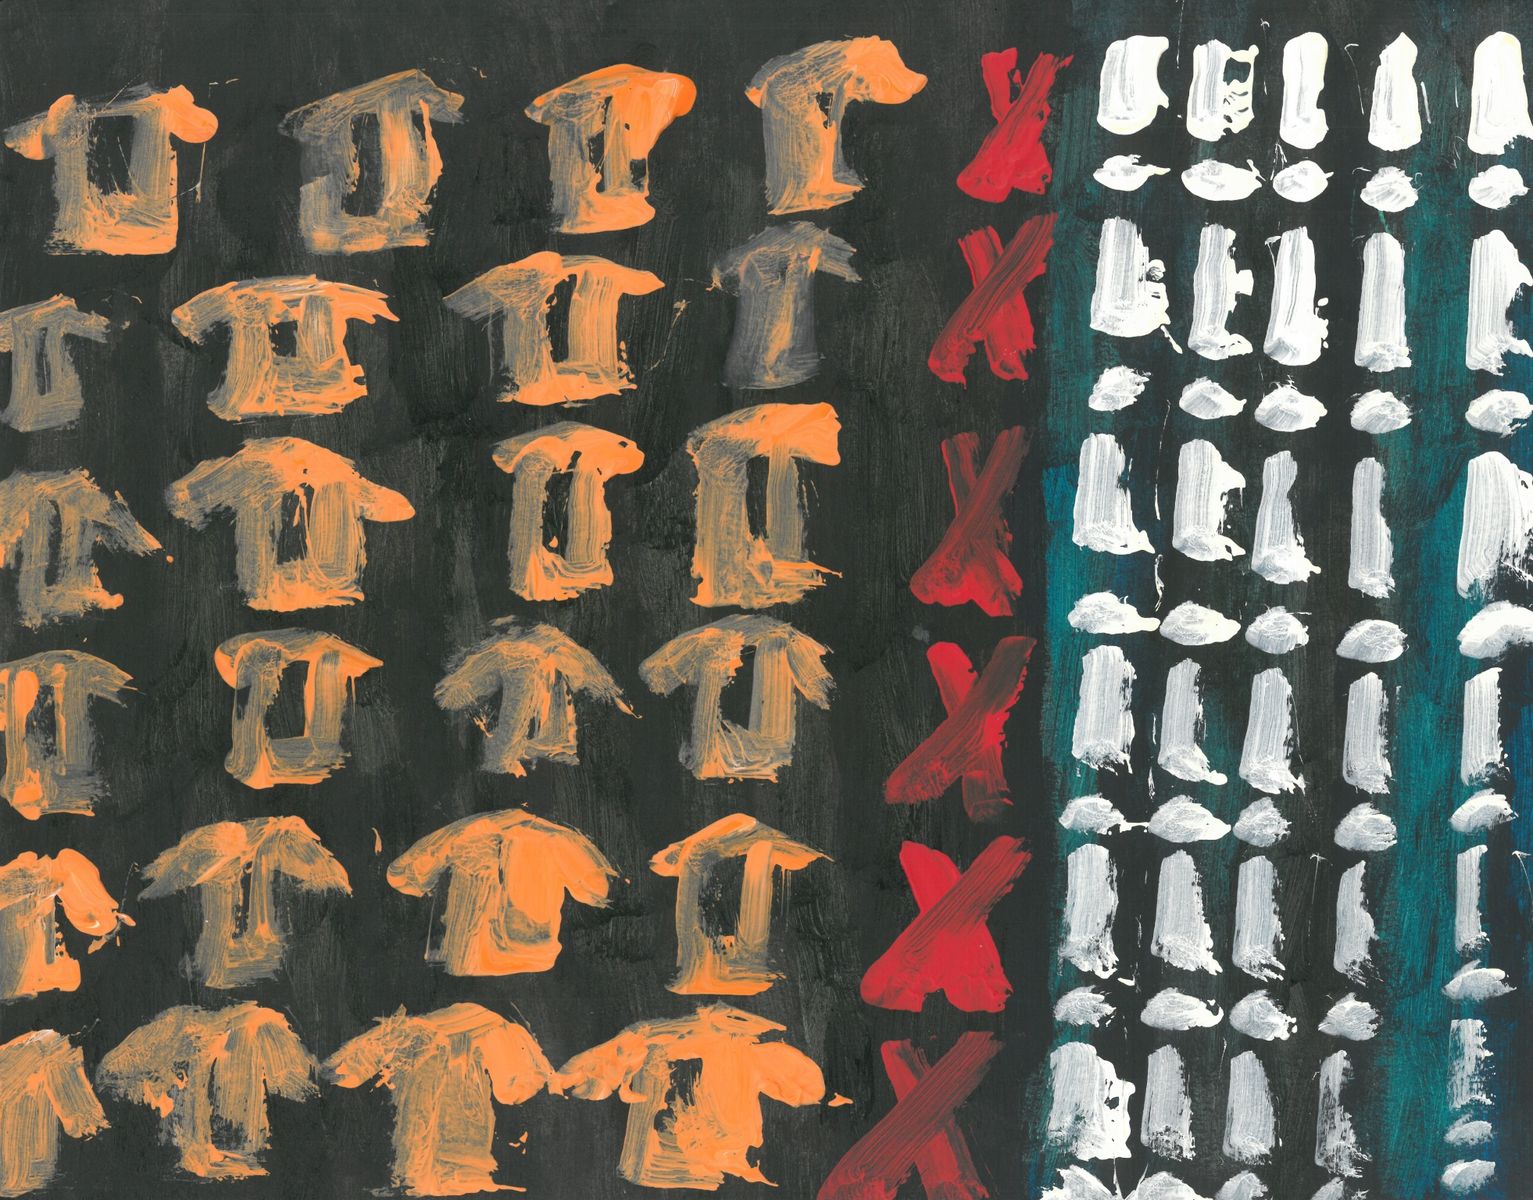 Acrylic on paper artwork against a black background with four vertical lines of small orange tshirts, one vertical line of red Xs, and five vertical lines of white ghosts